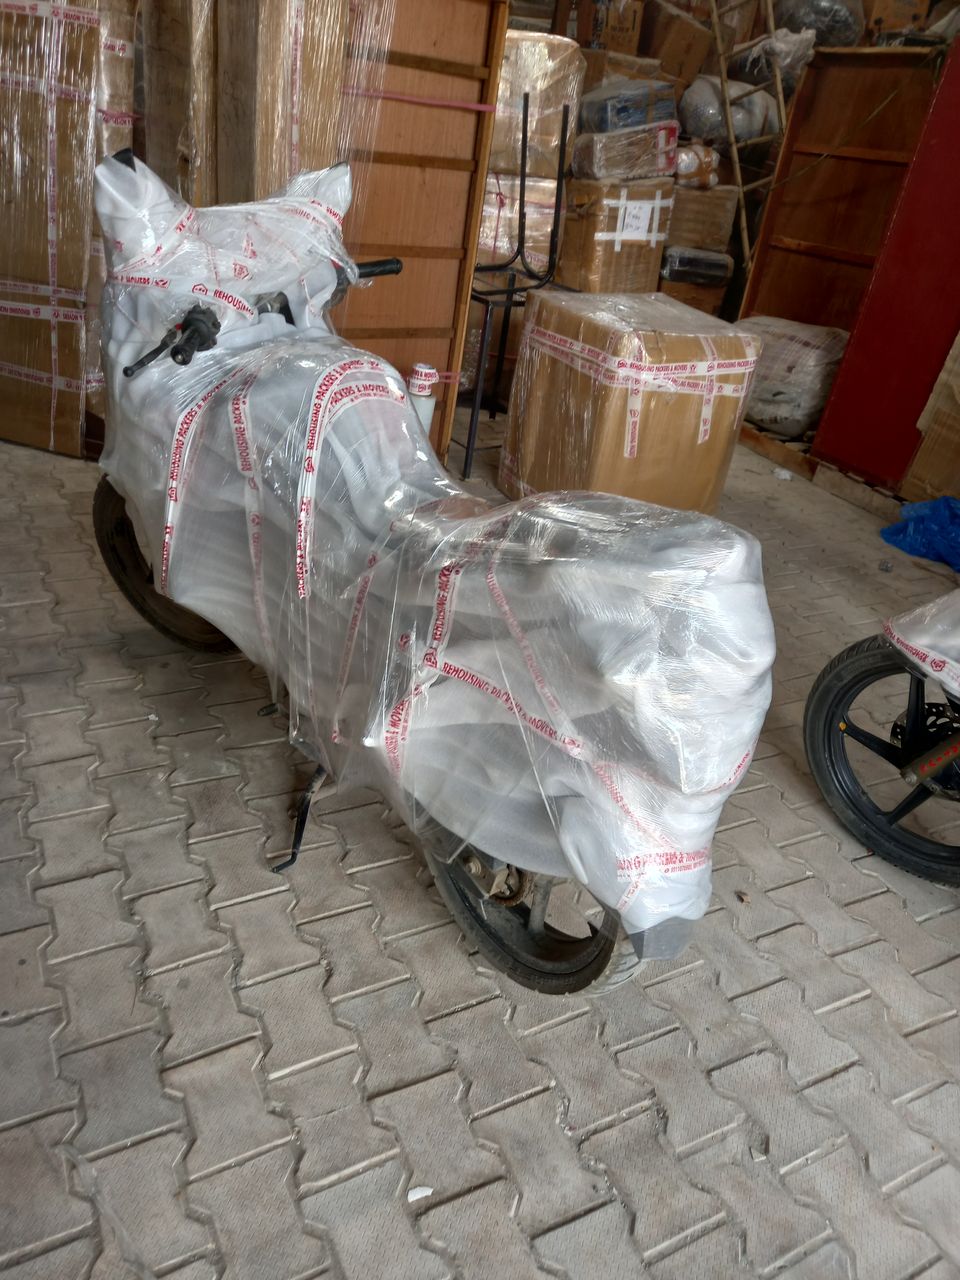 Rehousing packers and movers bike packing photo